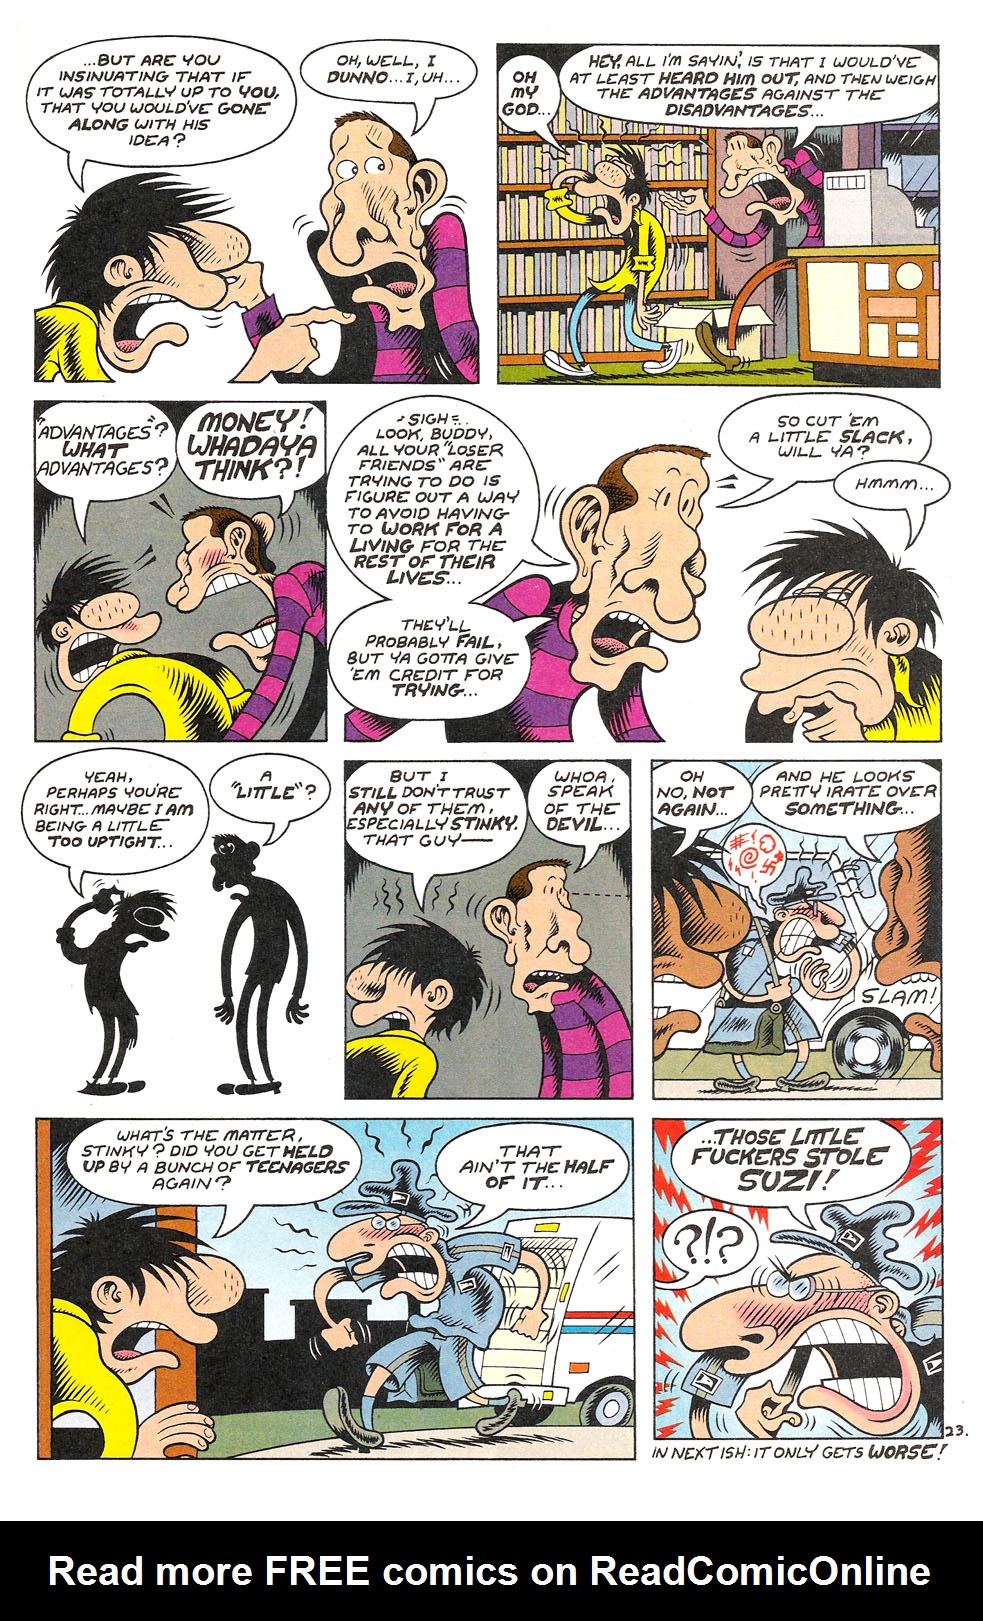 Read online Hate comic -  Issue #26 - 25